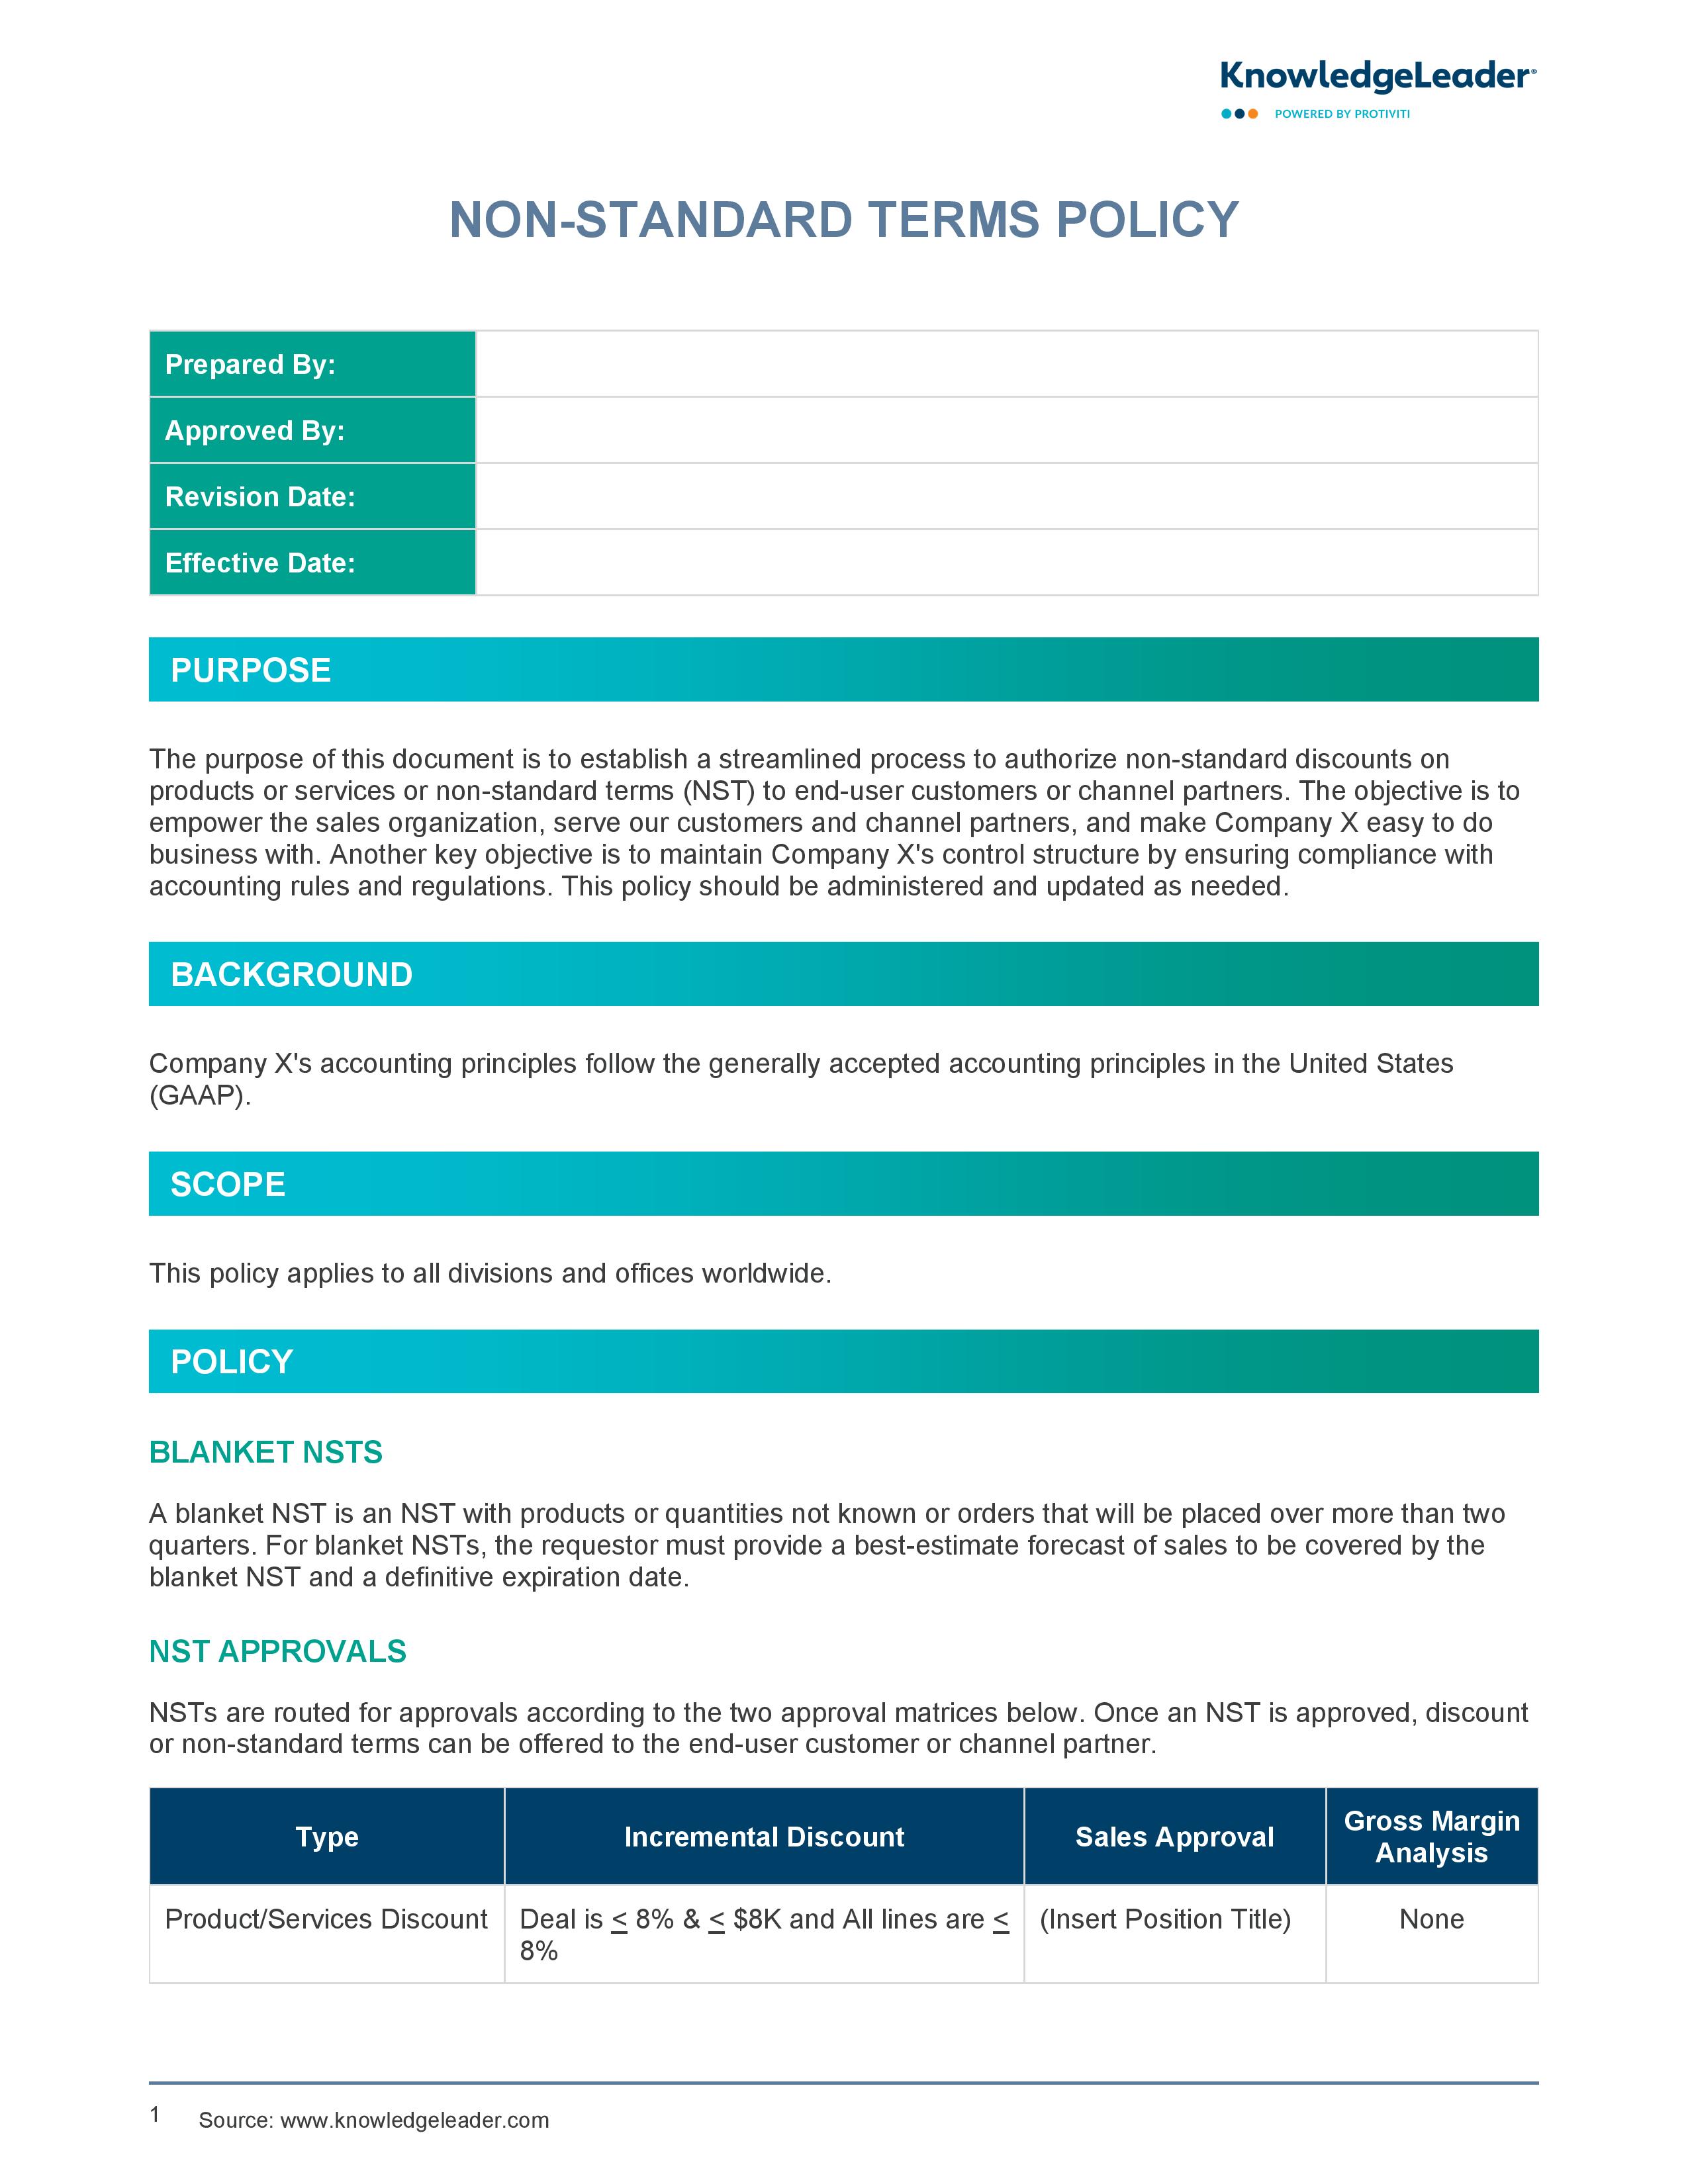 screenshot of the first page of Non-Standard Terms Policy